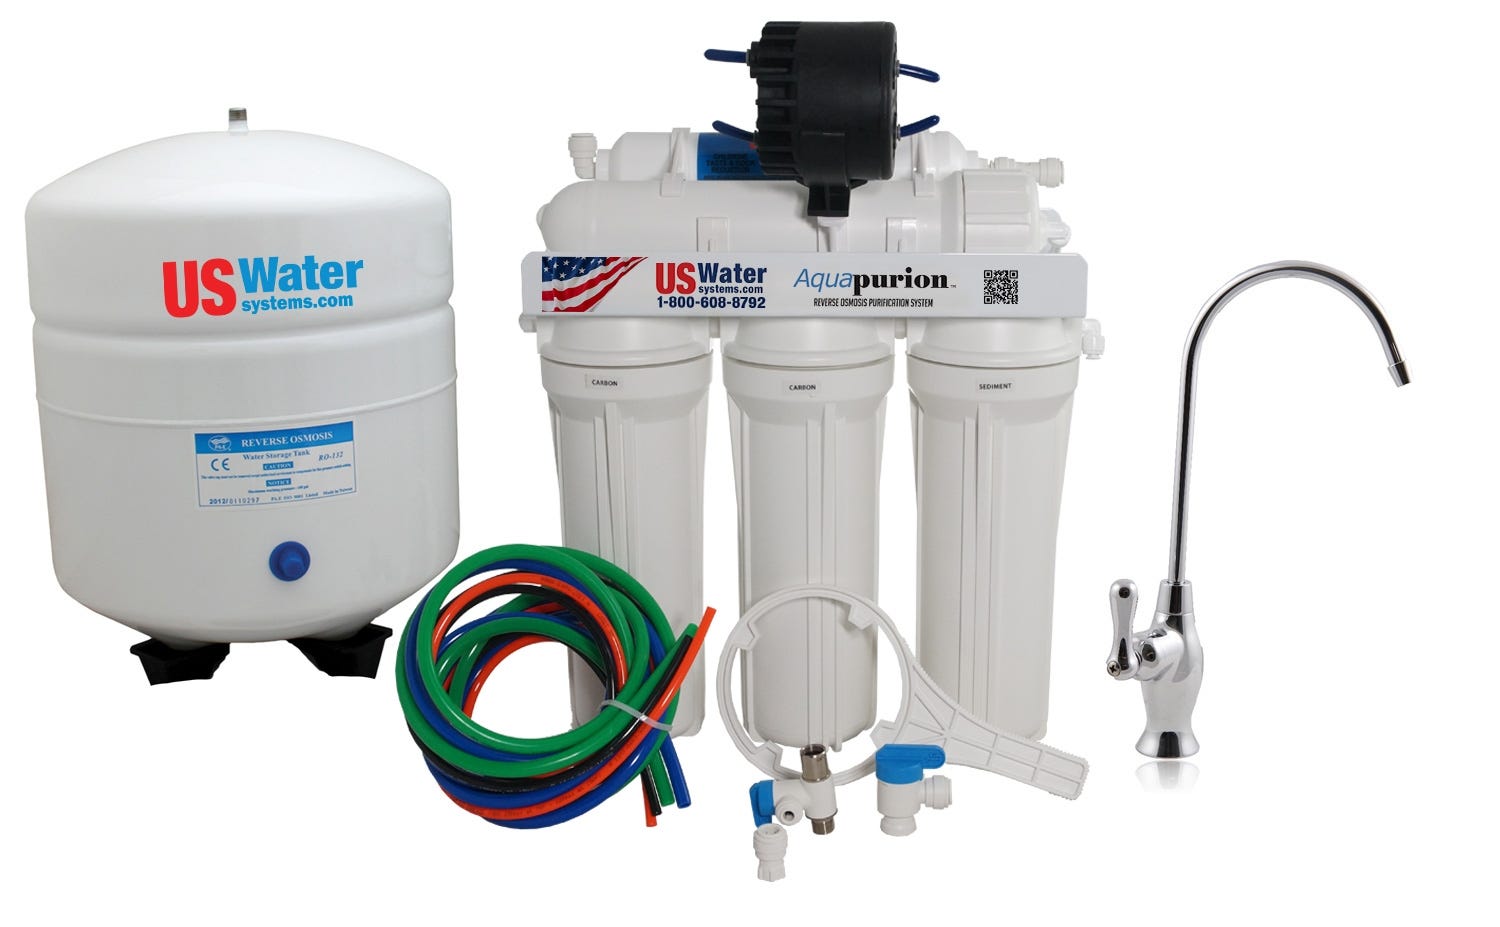 US Water Aquapurion 5-Stage Reverse Osmosis System With Enhanced Arsenic Removal